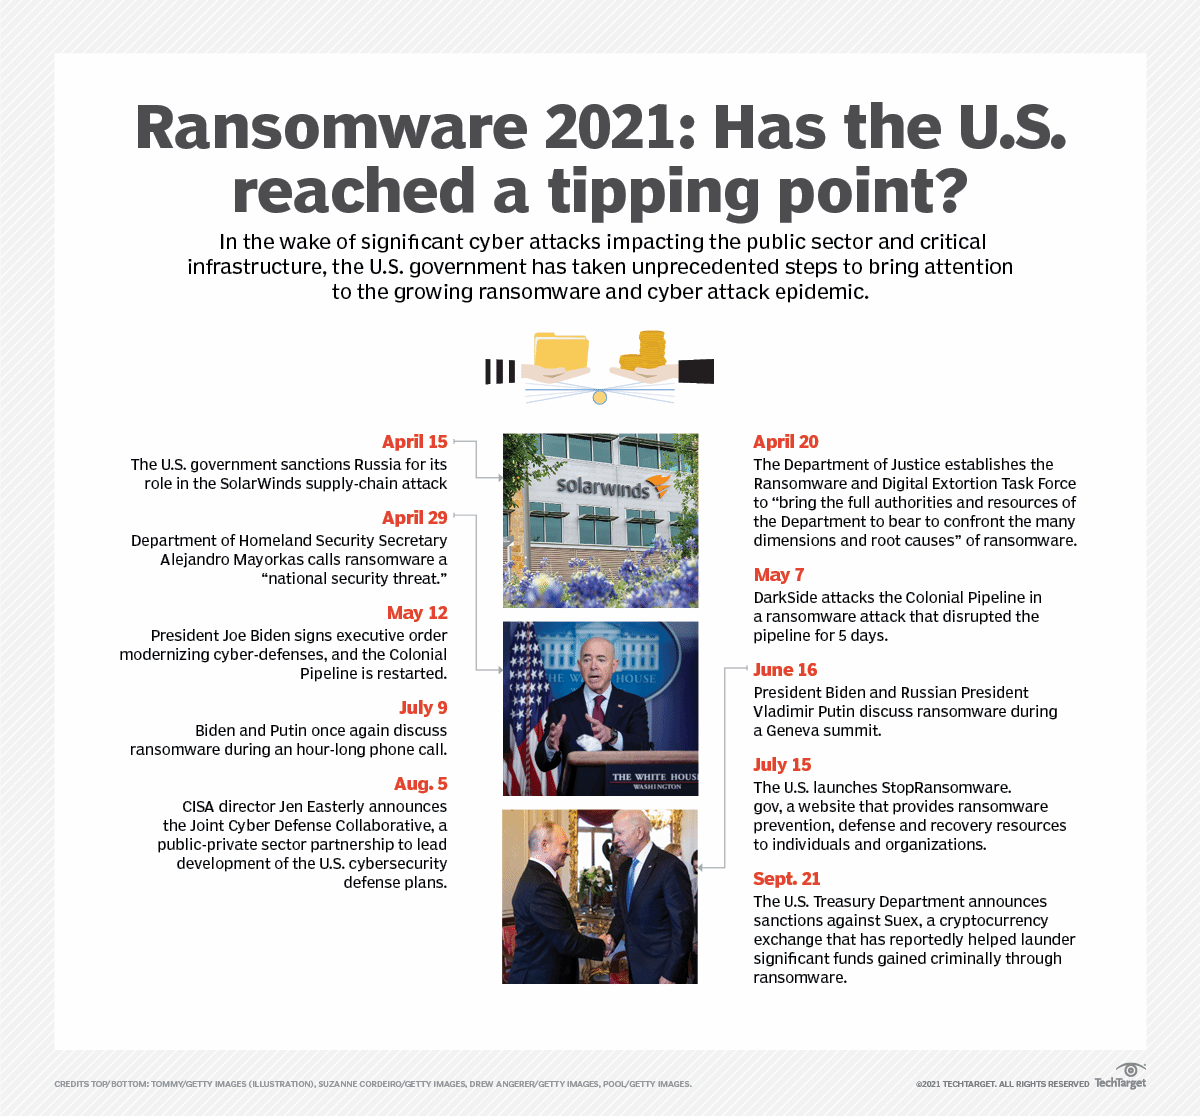 ransomware_2021_has_the_us_reached_a_tipping_point-f